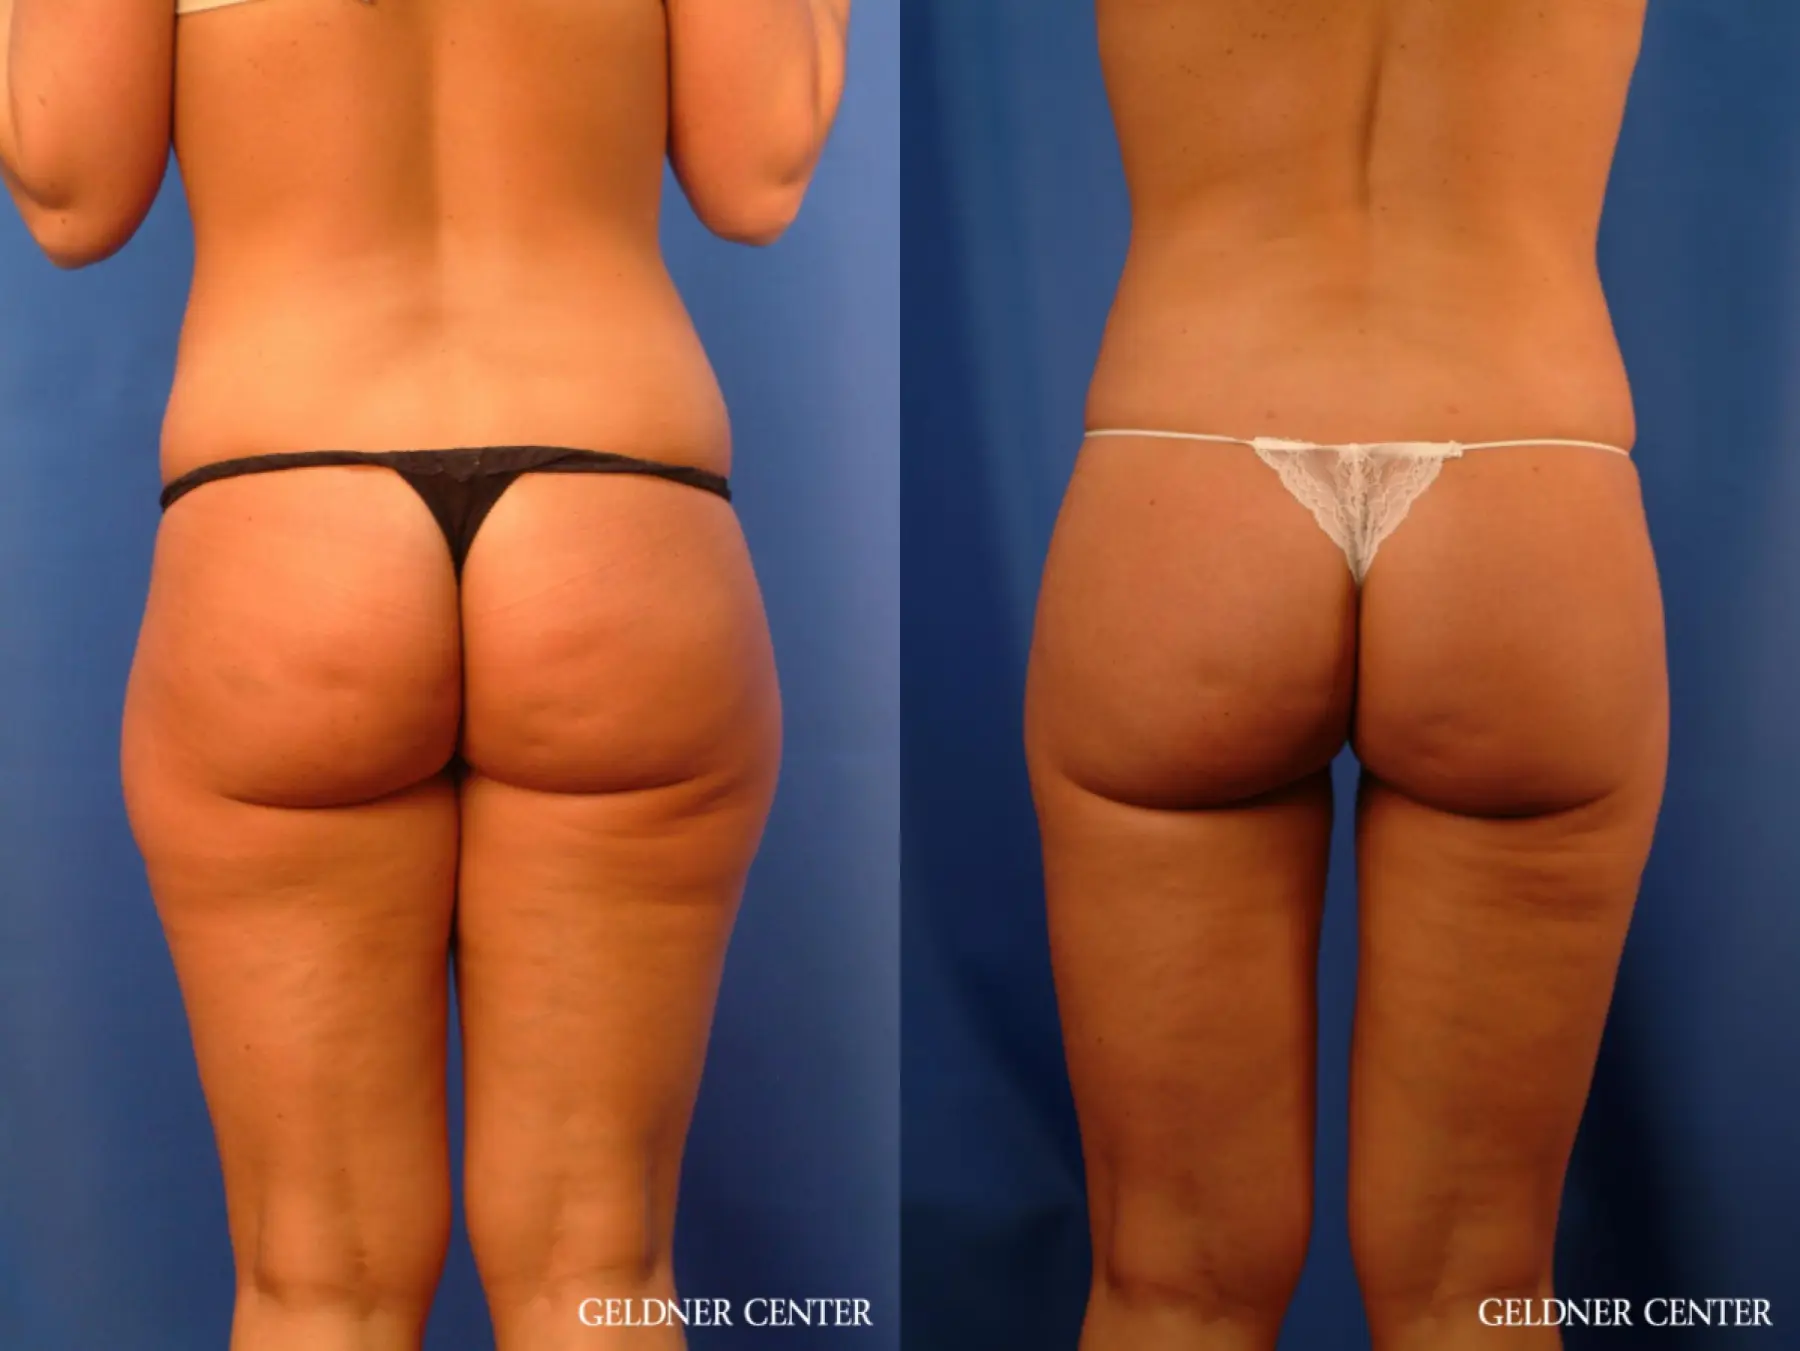 Vaser lipo patient 2624 before and after photos - Before and After 4